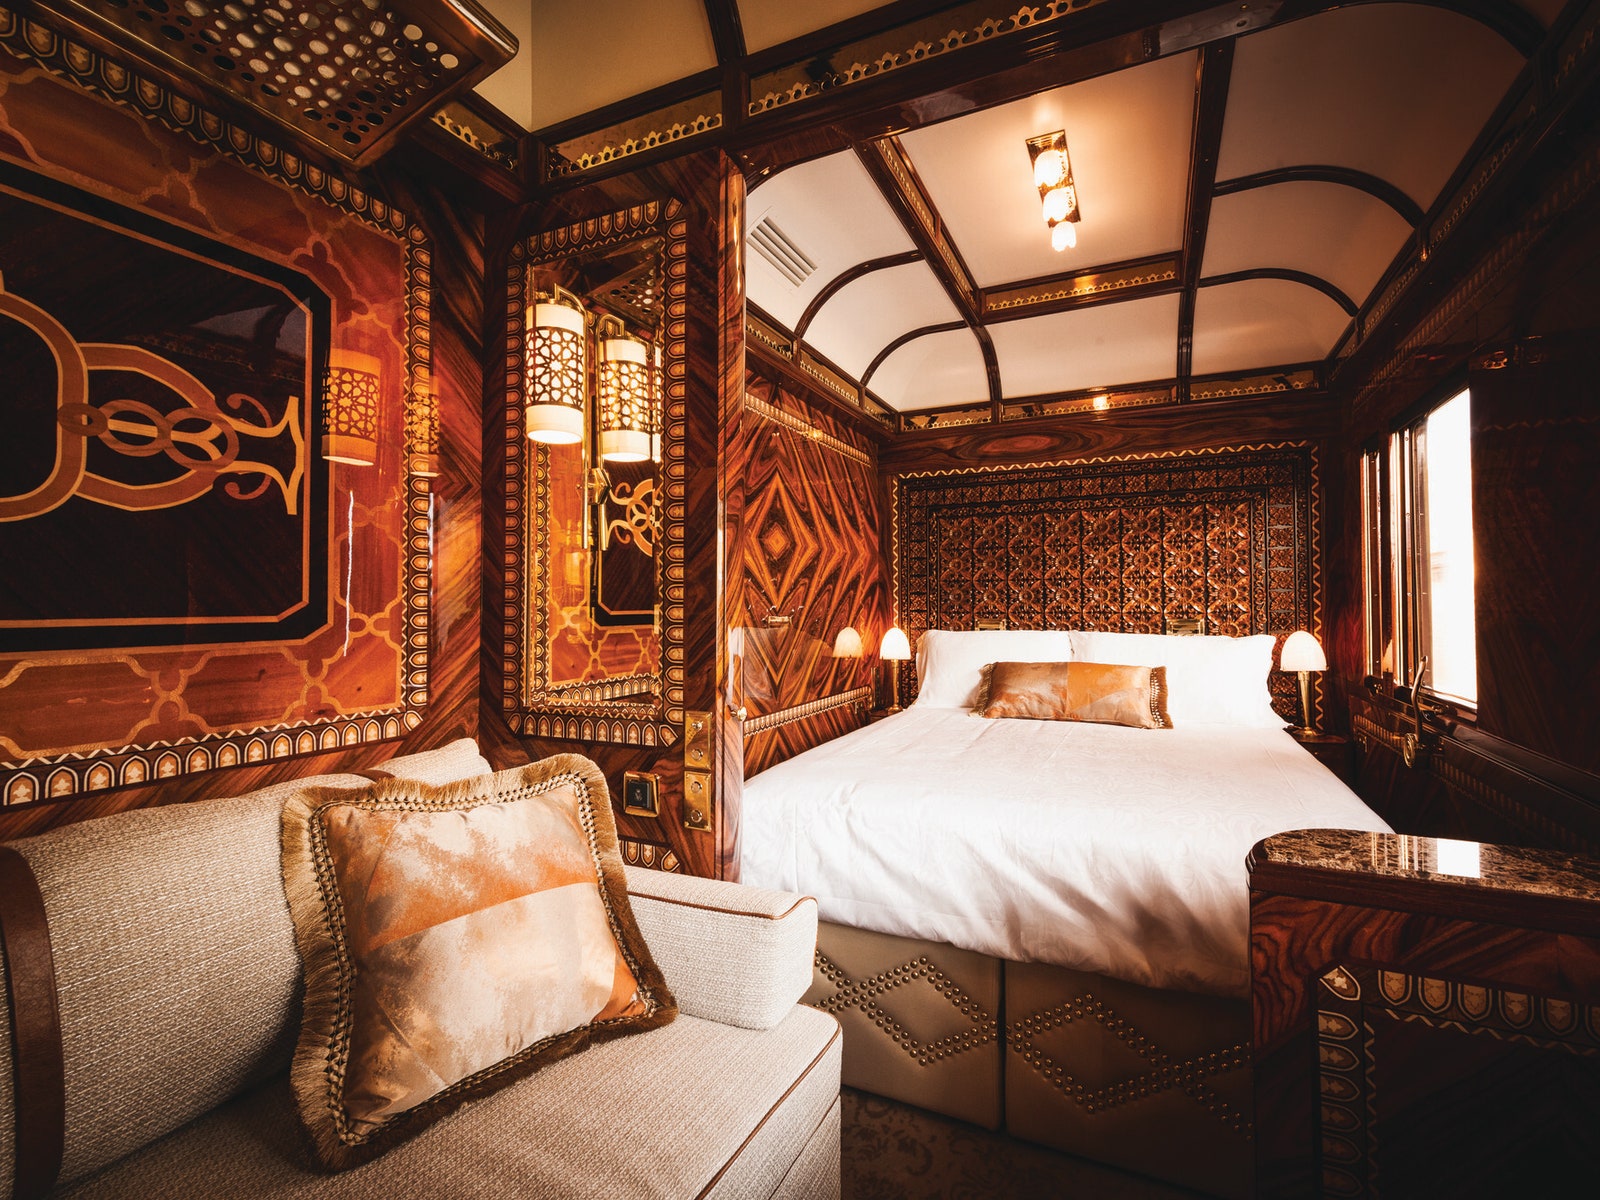 The Venice-Simplon Orient Express is first class in luxury locomotion